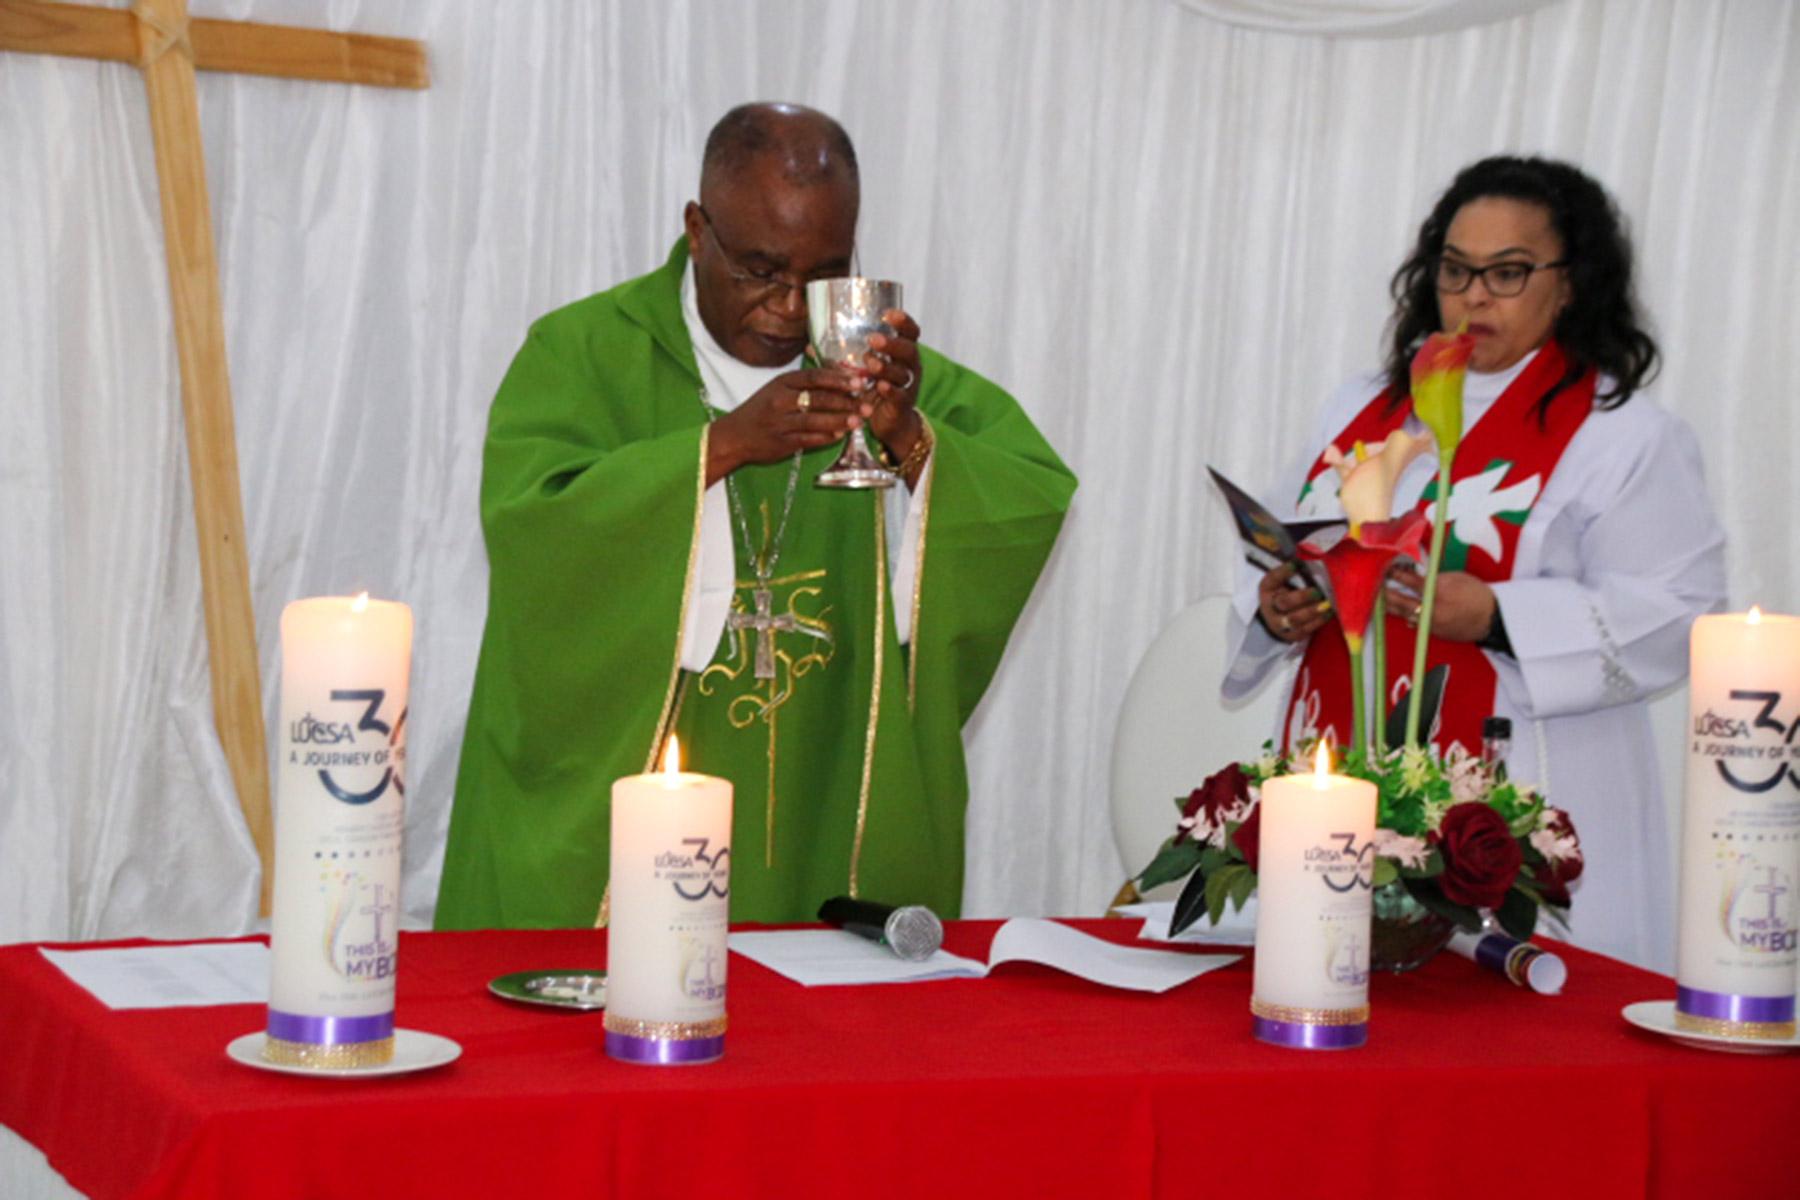 LUCSA President Bishop Bvumbwe and LUCSA Executive Director Rev. Kasper presided over worship together at the 11th LUCSA Assembly. Photo: LUCS/R. Mofulatsi